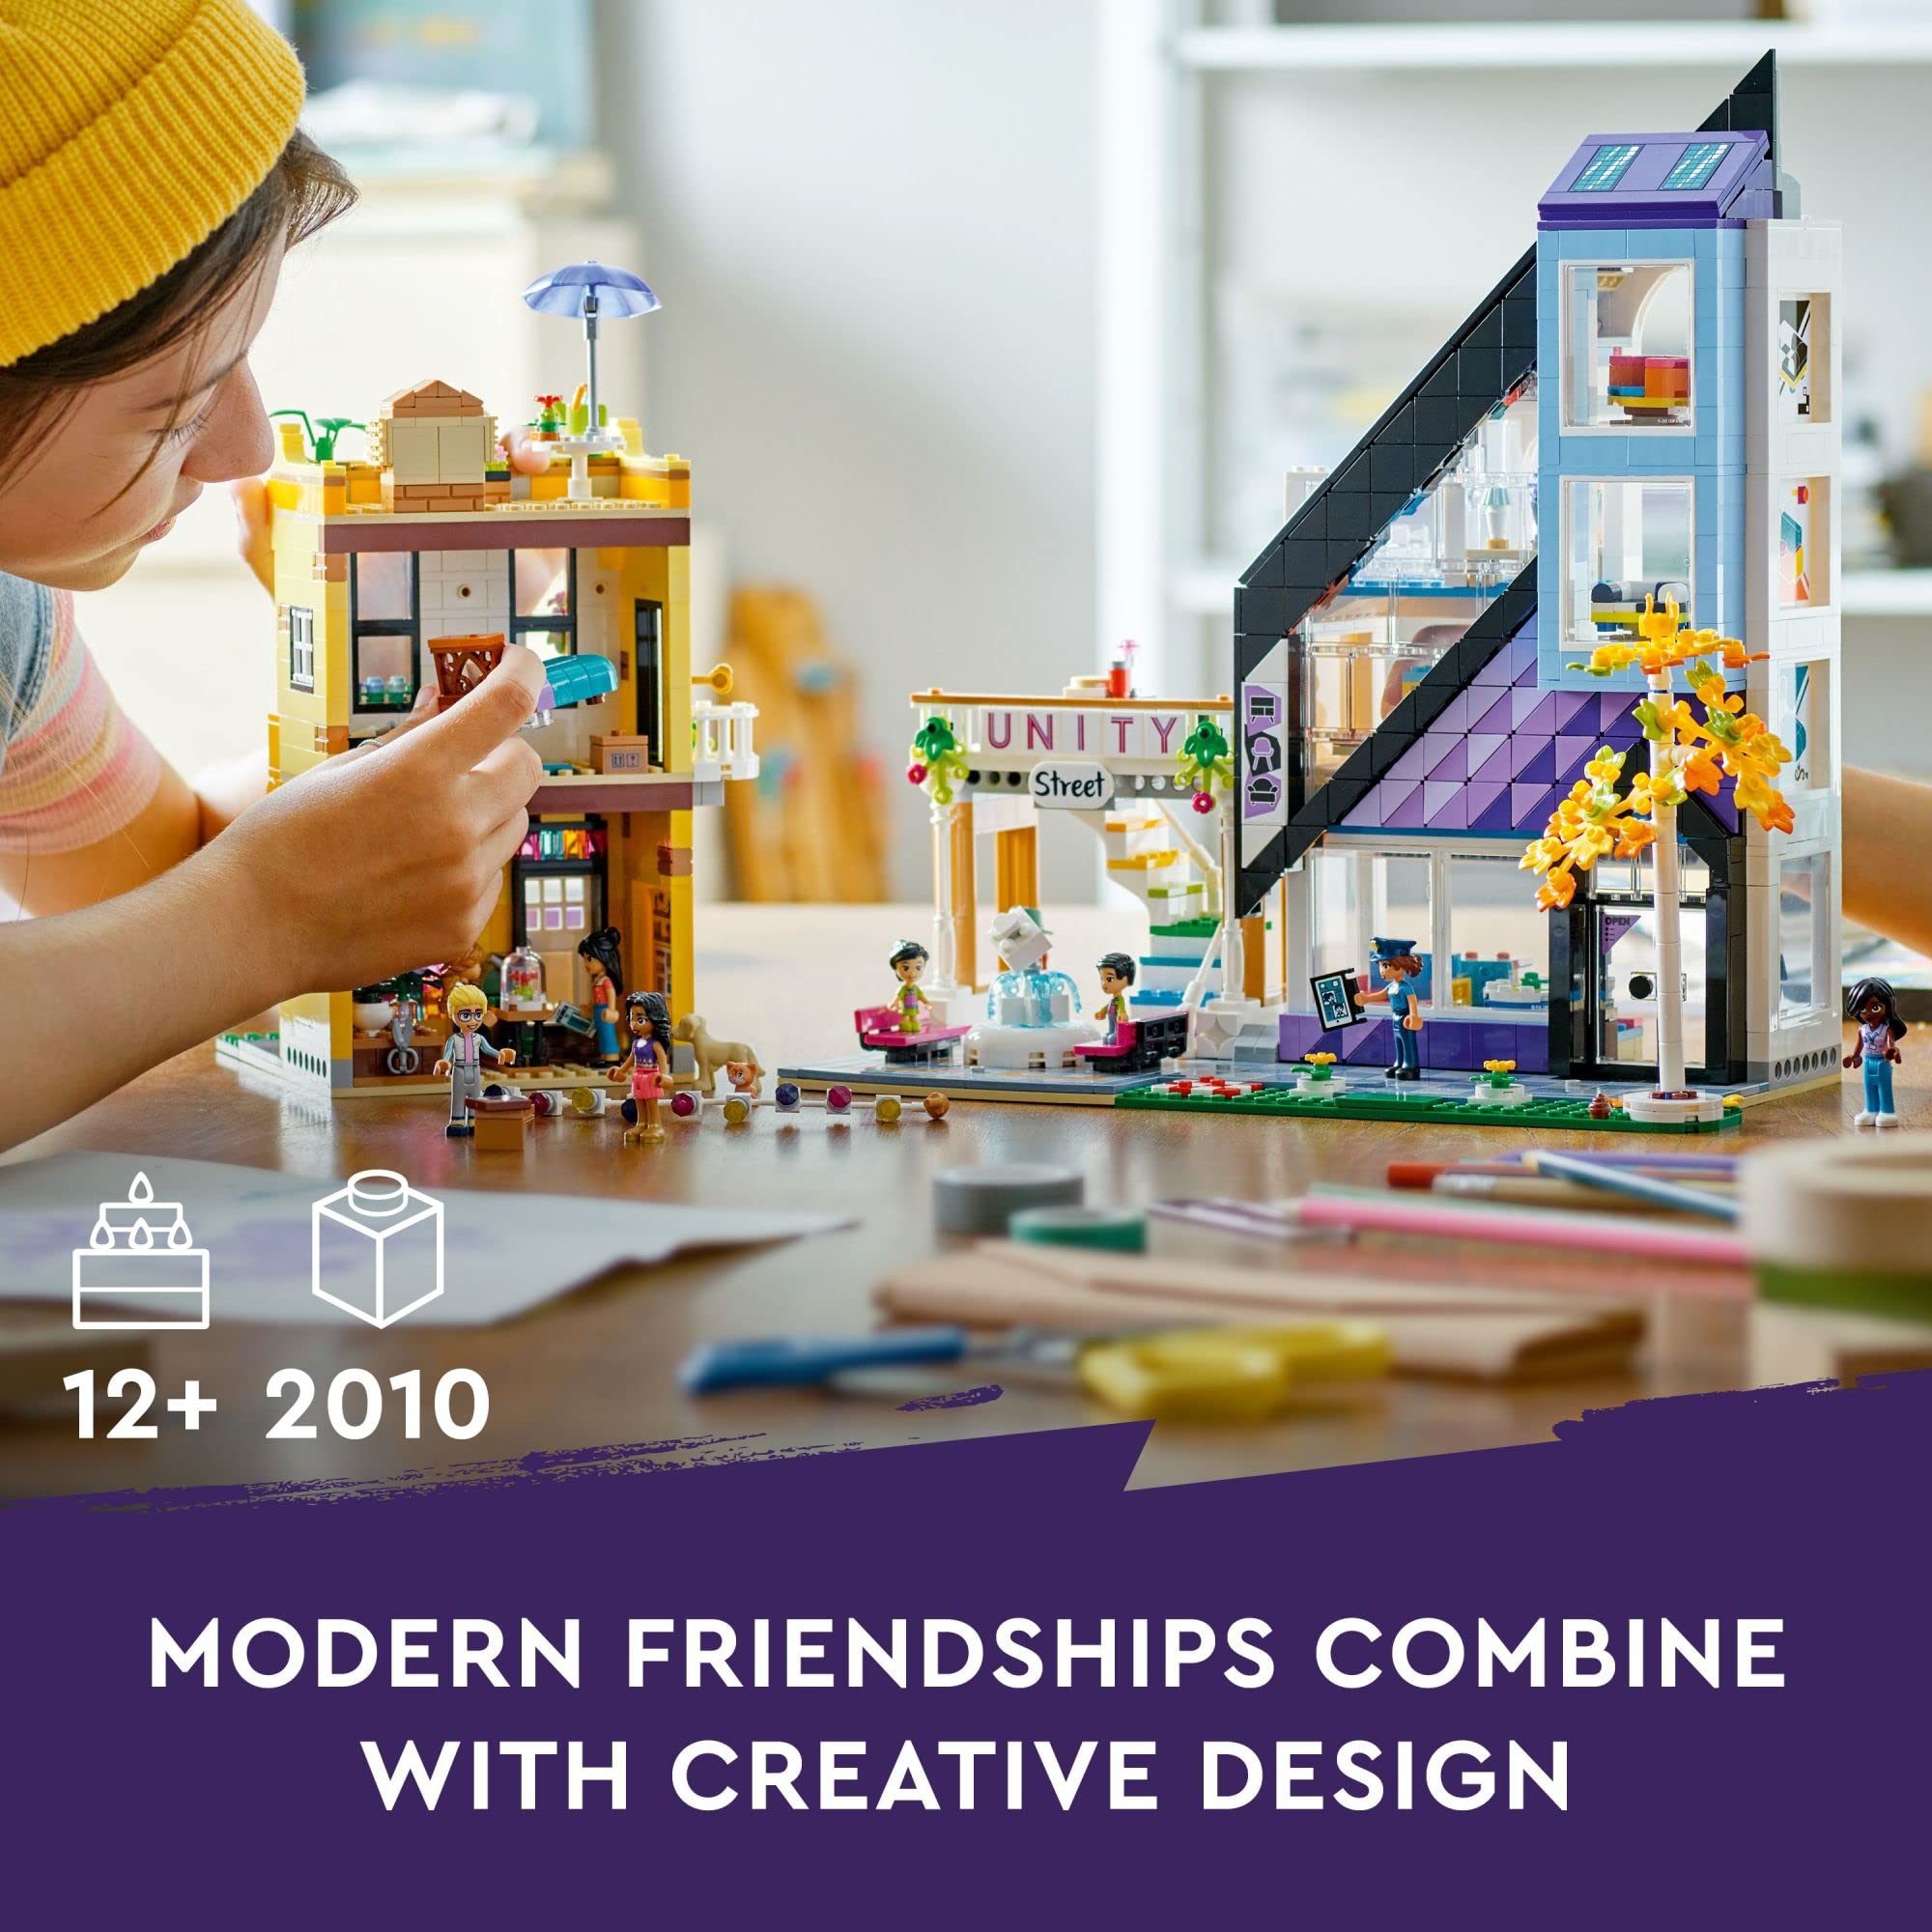 LEGO Friends Downtown Flower and Design Stores 41732 Building Set - Buildable Toy with Apartment, Shops, House, and Classic Characters, Model to Customize, Decorate, and Display for Ages 12+